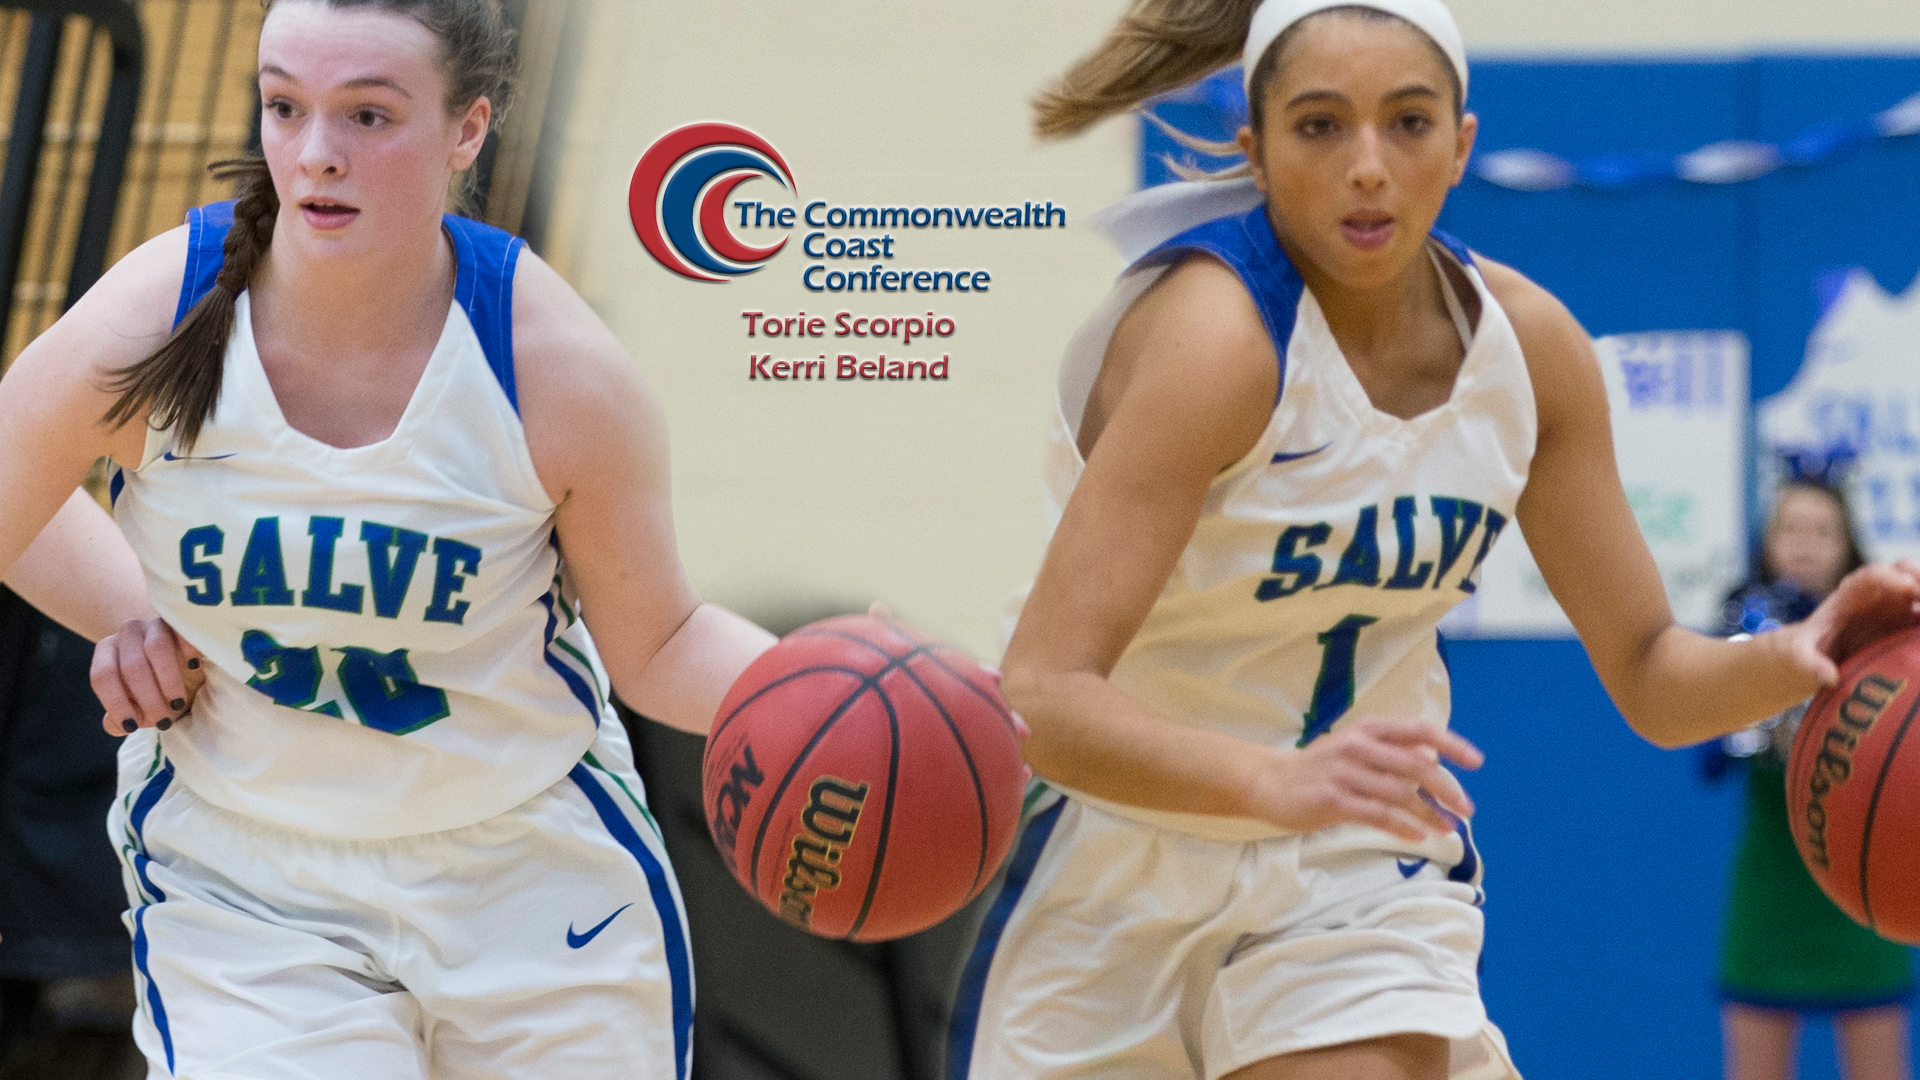 Kerri Beland (left) and Torie Scorpio were both selected to the All-CCC women's basketball teams by the league's head coaches. (Original photos by Rob McGuinness)